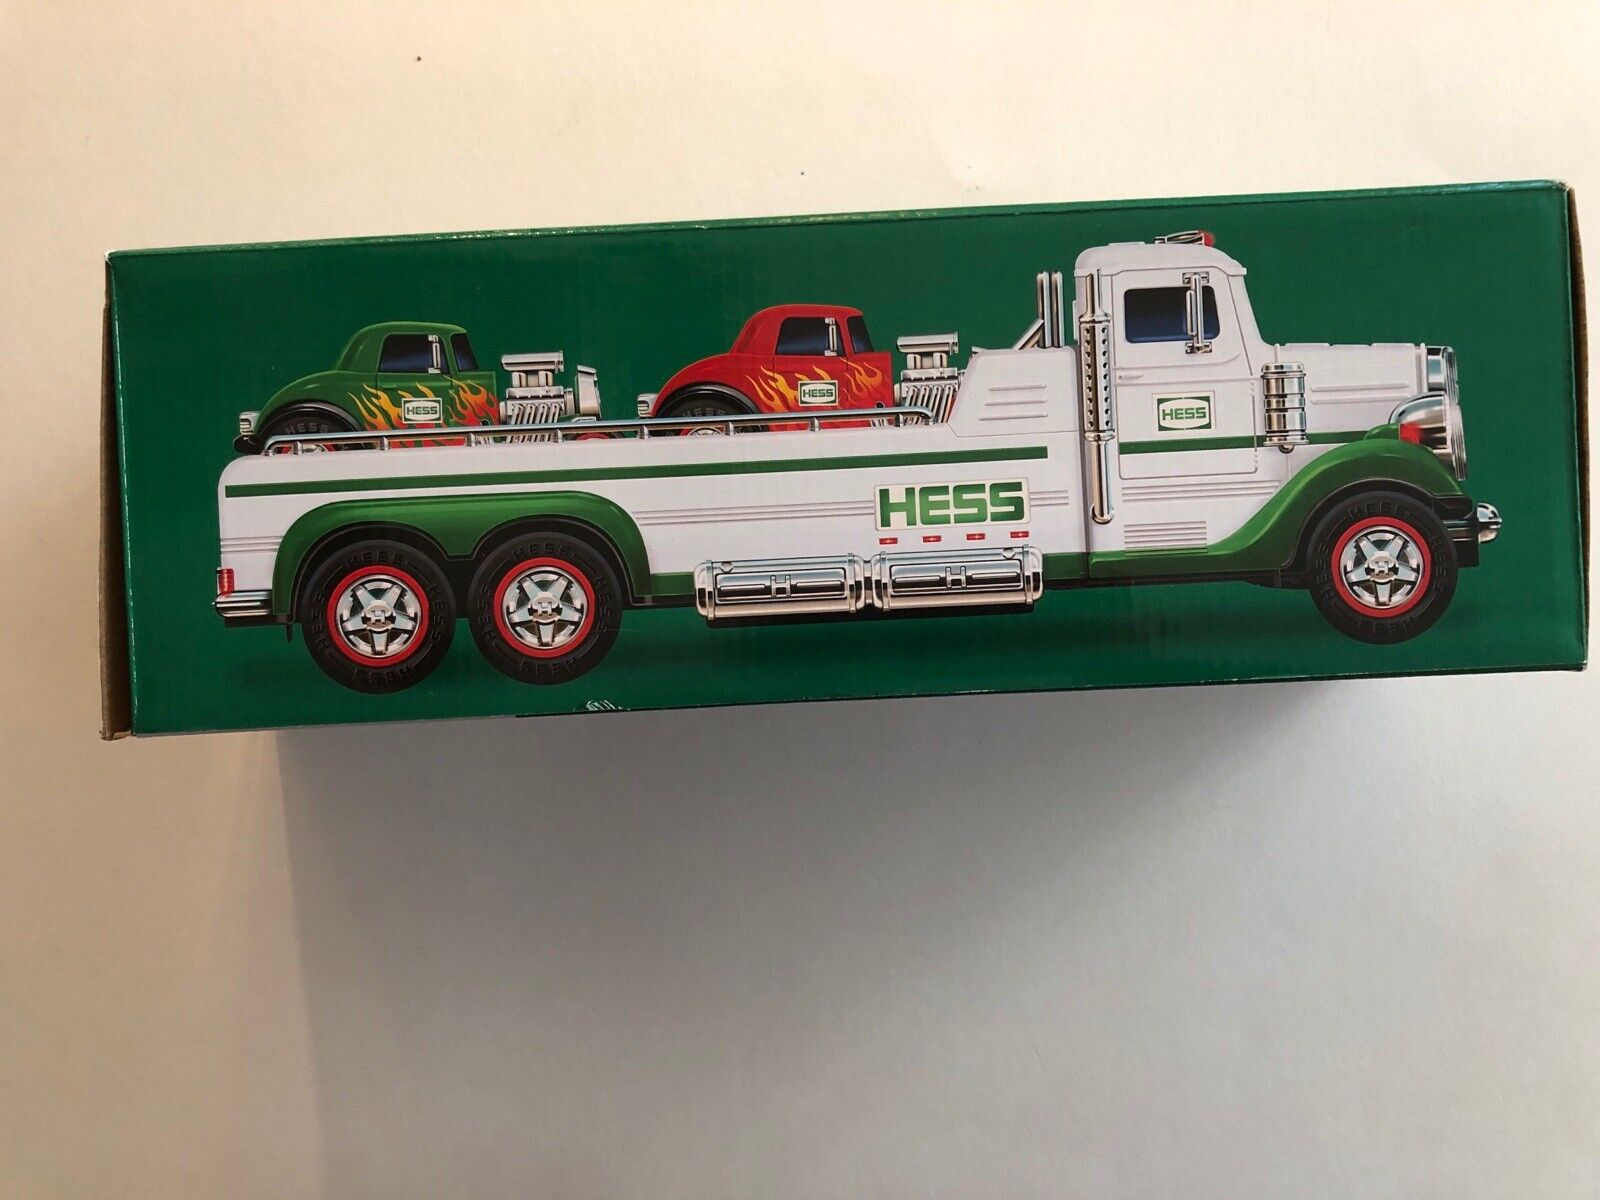 2022 Hess Flatbed Truck With 2 Hot Rods (Brand New)